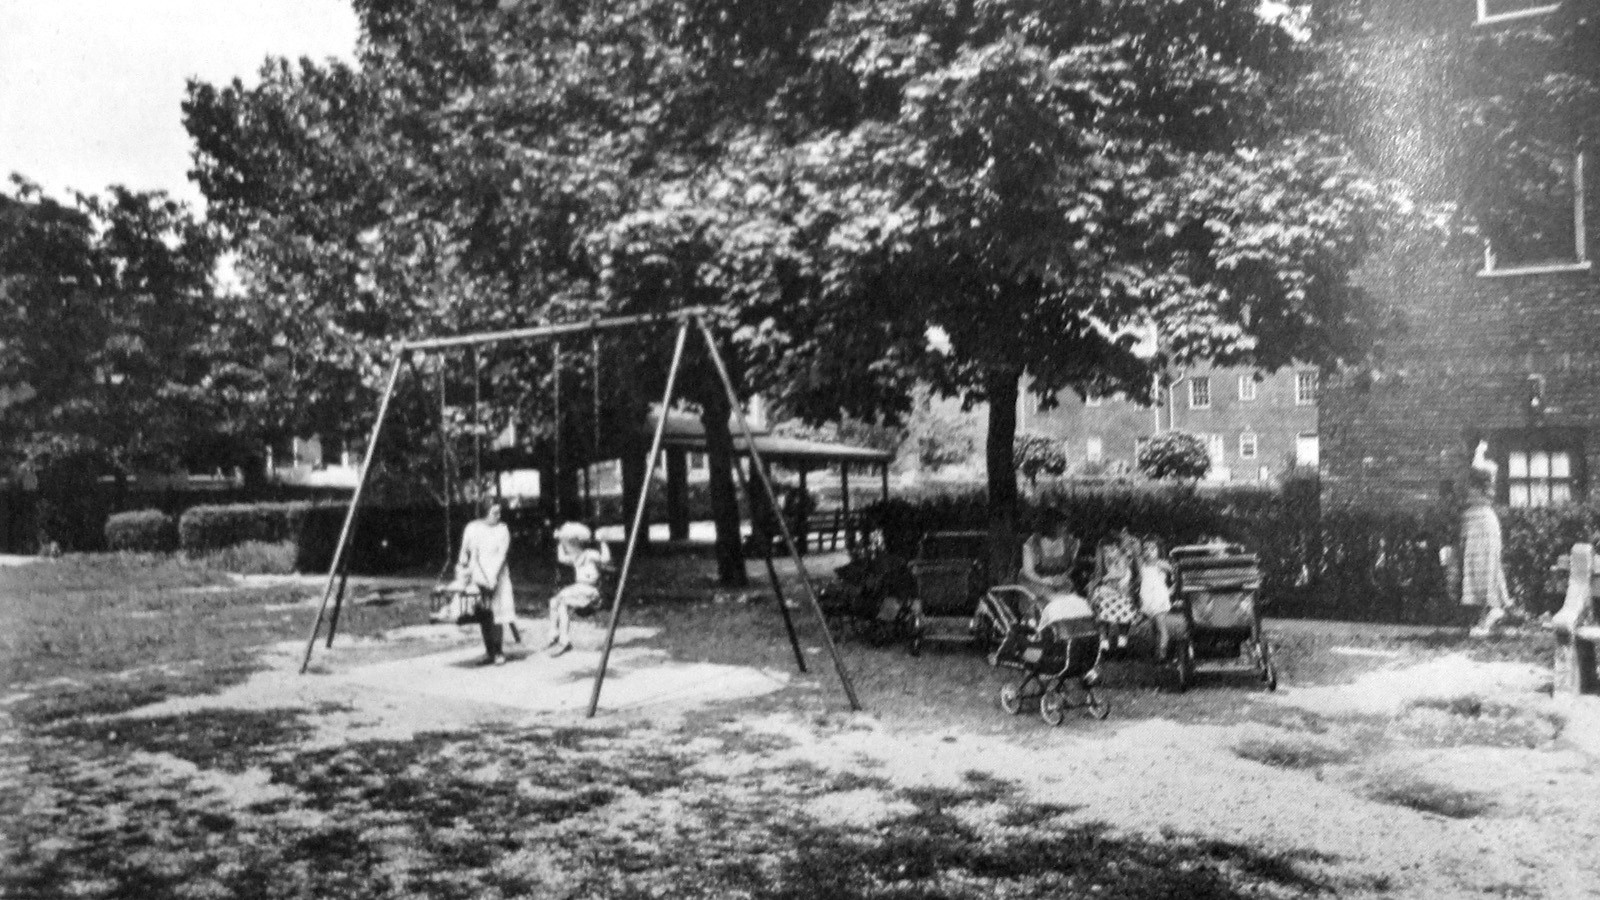 Phipps Playground, Stein, Clarence. Toward New Towns for America.